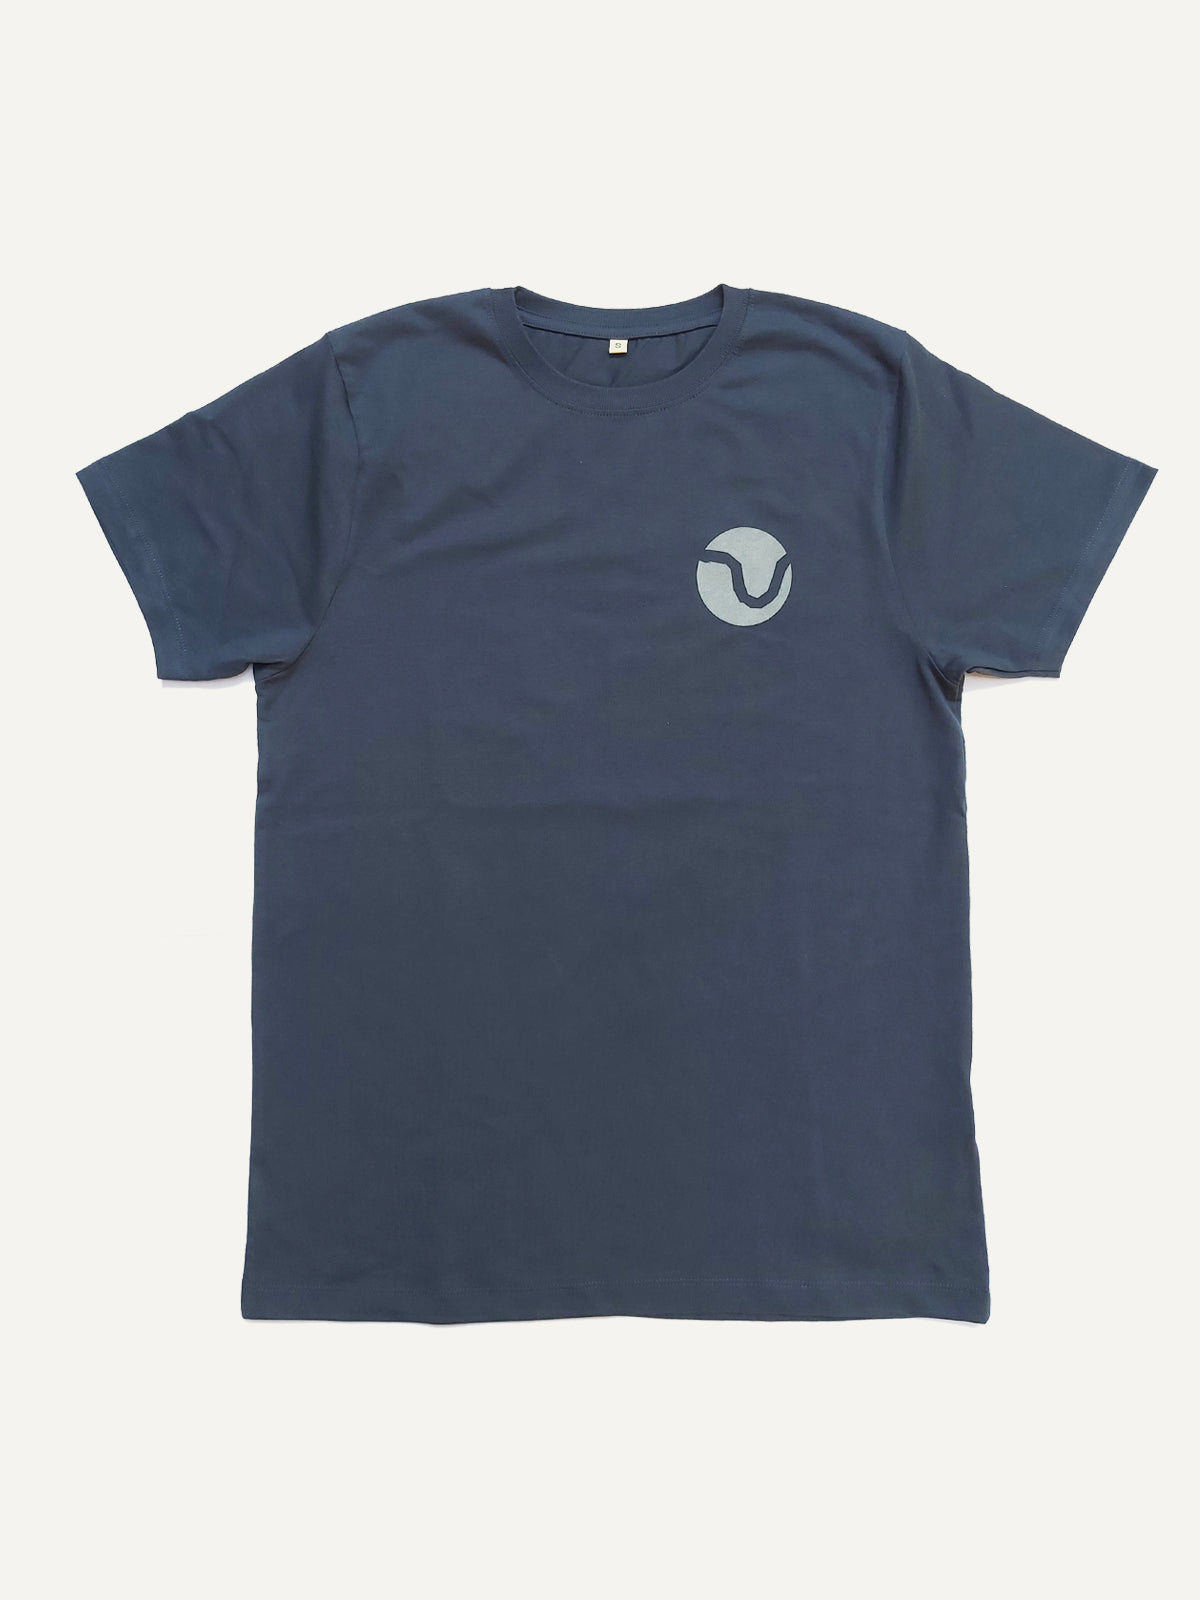 Blue men's t-shirt with Danube Bend pattern